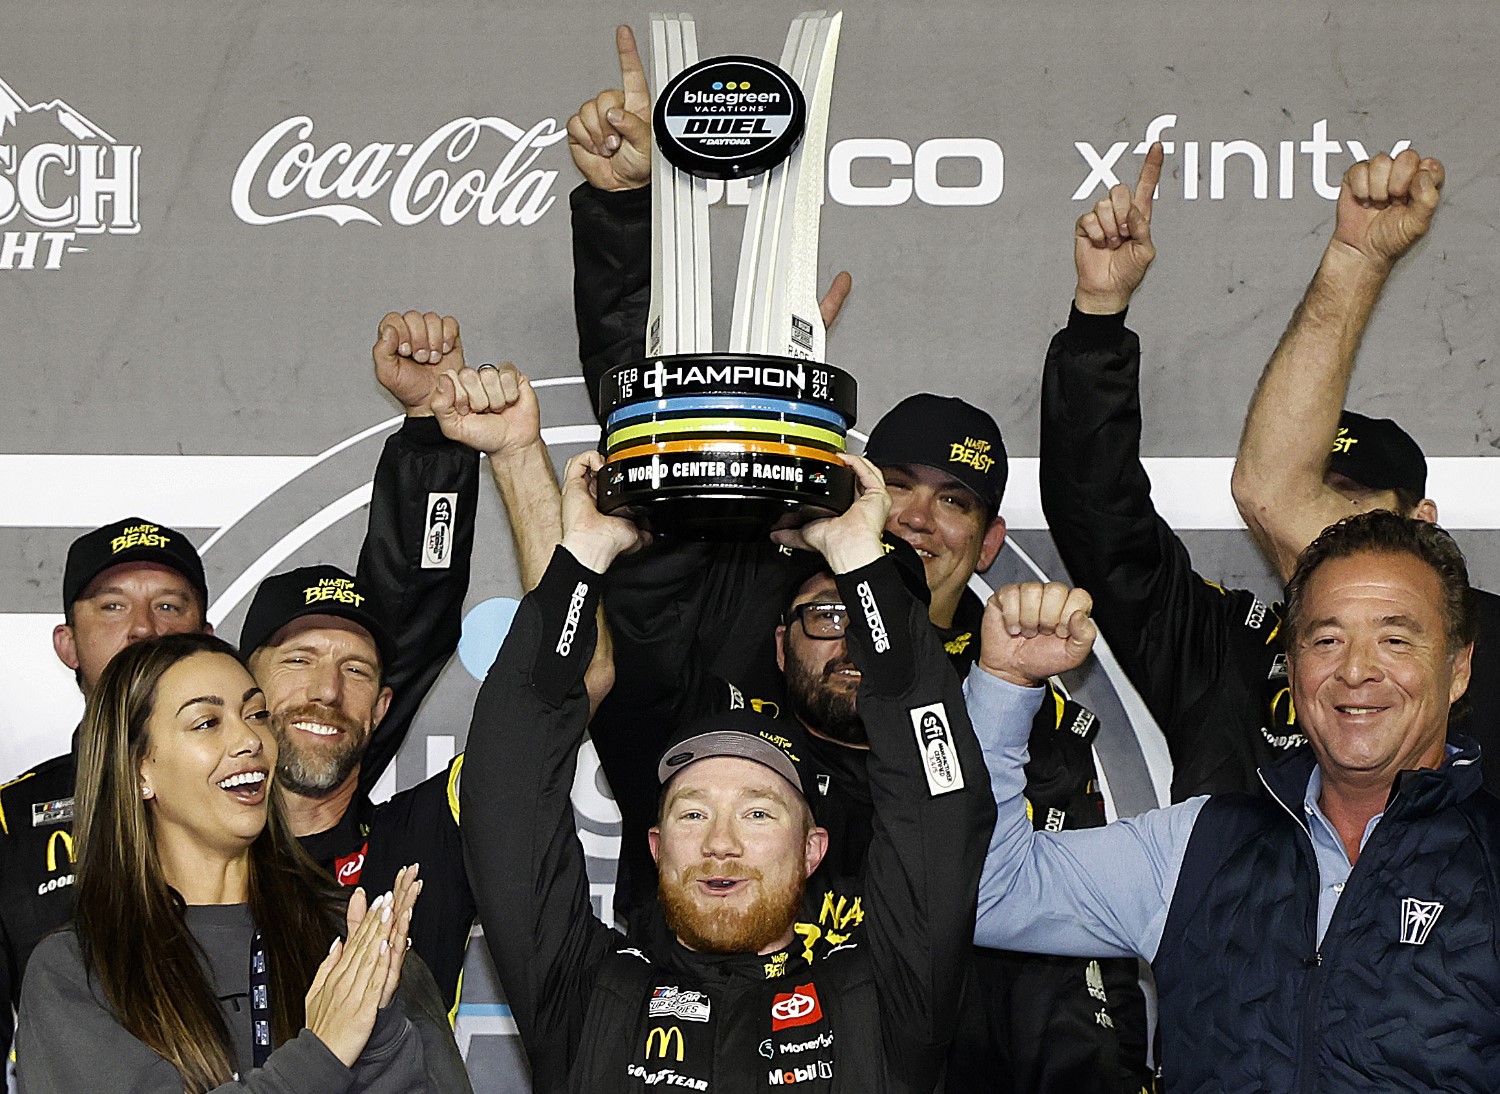 Tyler Reddick, driver of the #45 Nasty Beast Toyota, celebrates in victory lane after winning the NASCAR Cup Series Bluegreen Vacations Duel #1 at Daytona International Speedway on February 15, 2024 in Daytona Beach, Florida. (Photo by Chris Graythen/Getty Images)